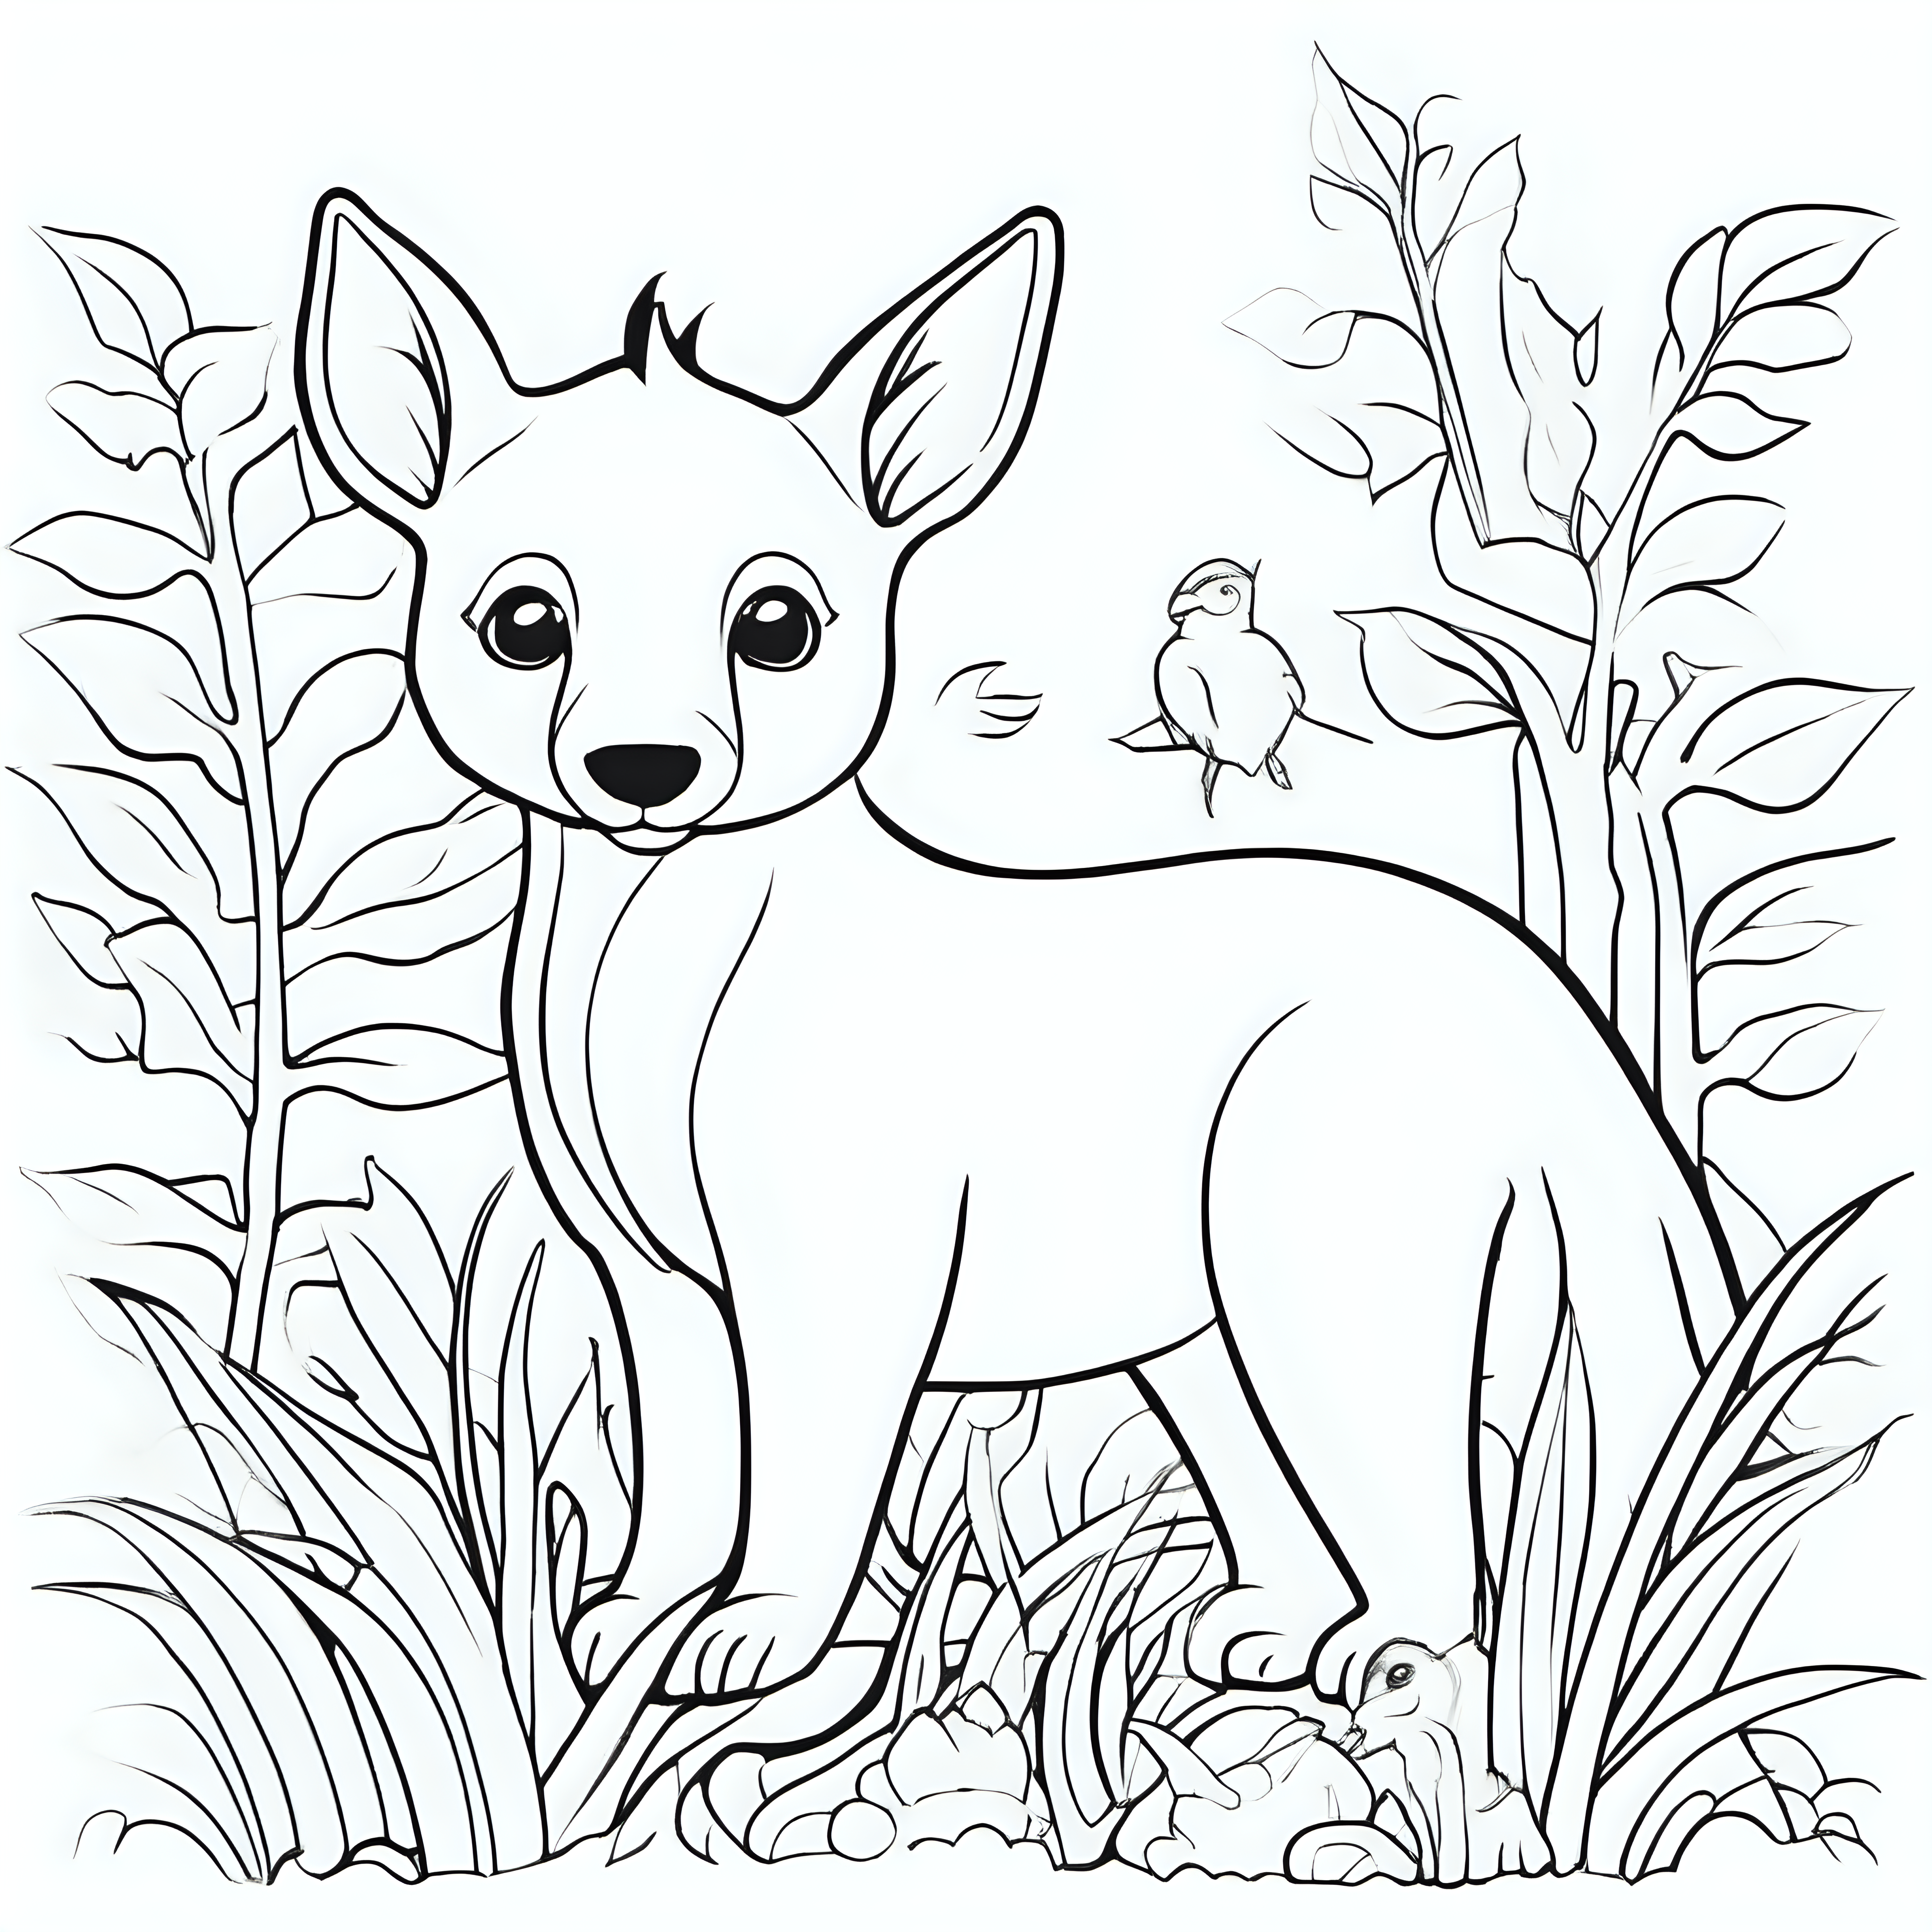 draw cute animals with only the outline in